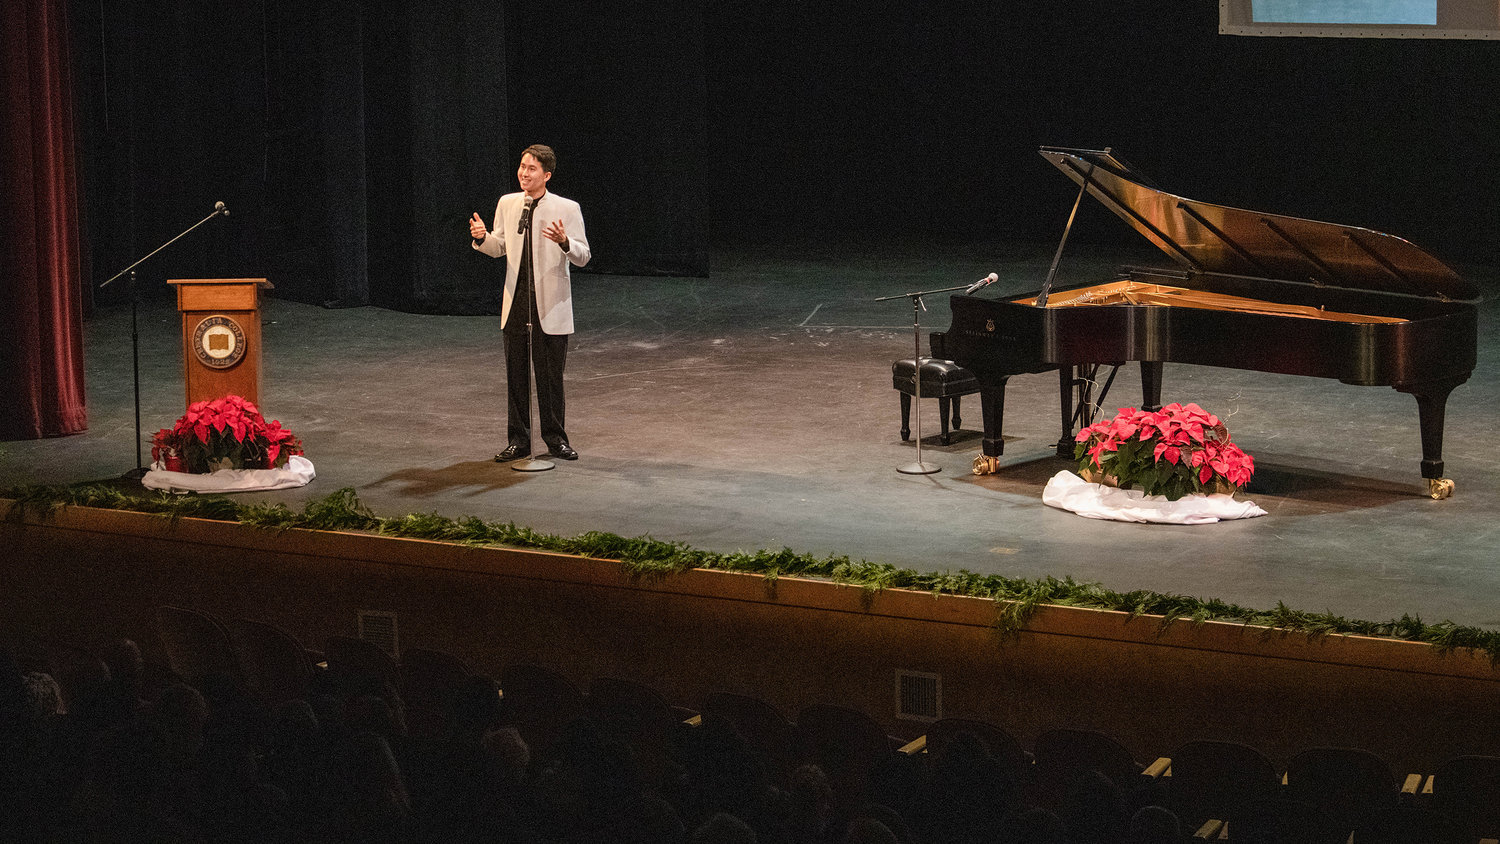 Charlie Albright smiles on stage inside the Corbet Theatre Friday evening during a “Classical Christmas Fundraiser Concert,” with proceeds going to the Charlie Albright Scholarship at Centralia College.